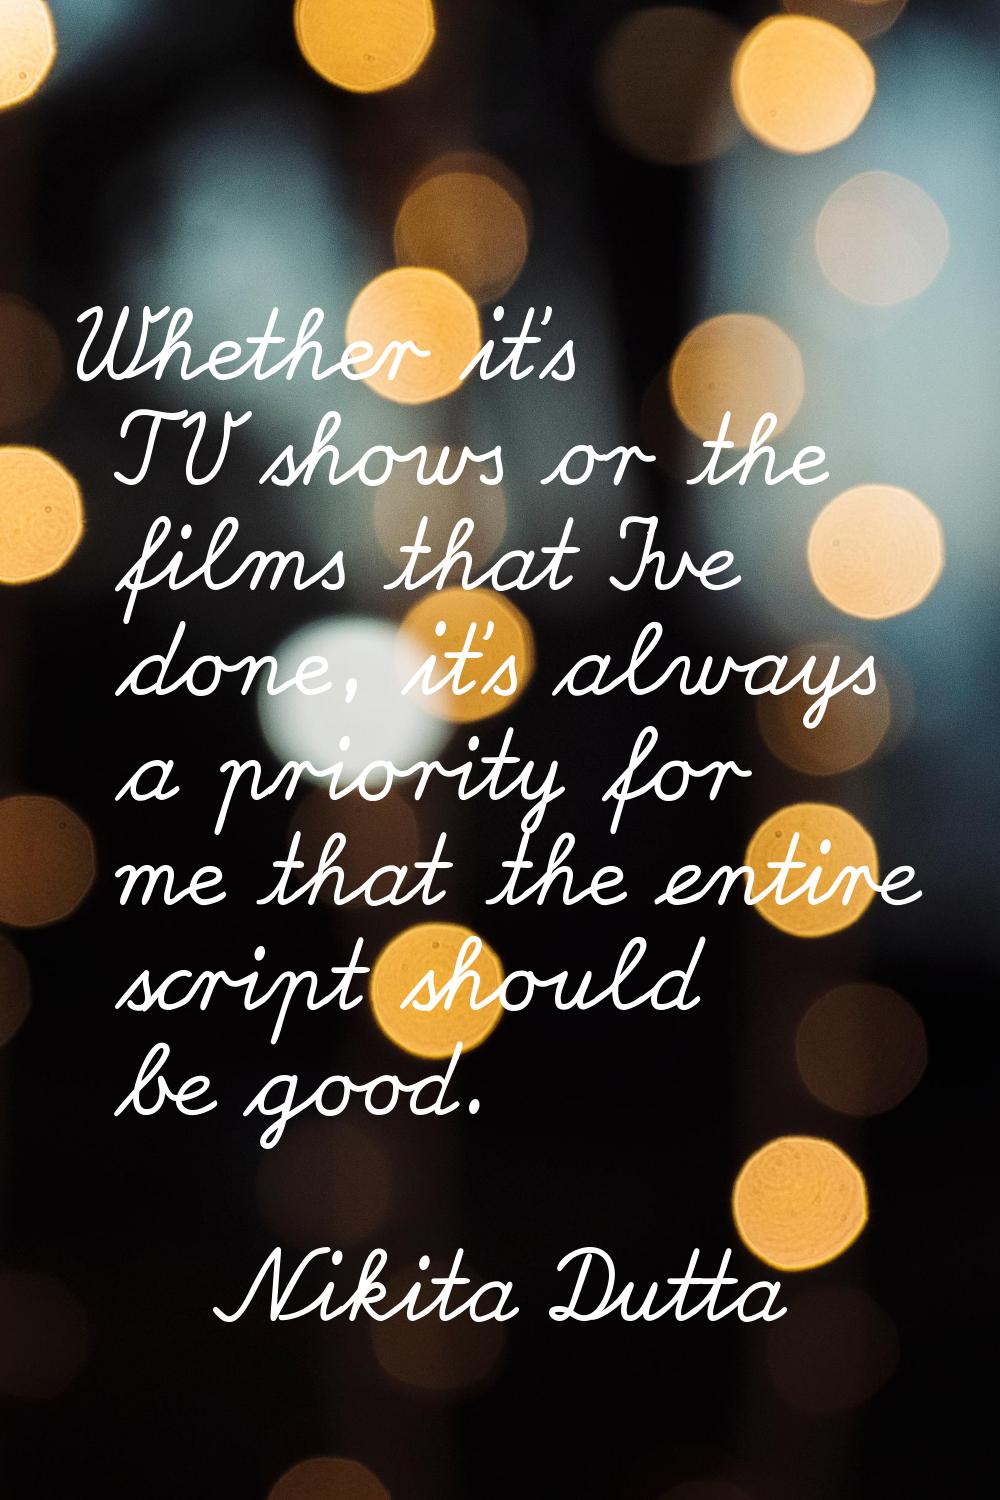 Whether it's TV shows or the films that I've done, it's always a priority for me that the entire sc